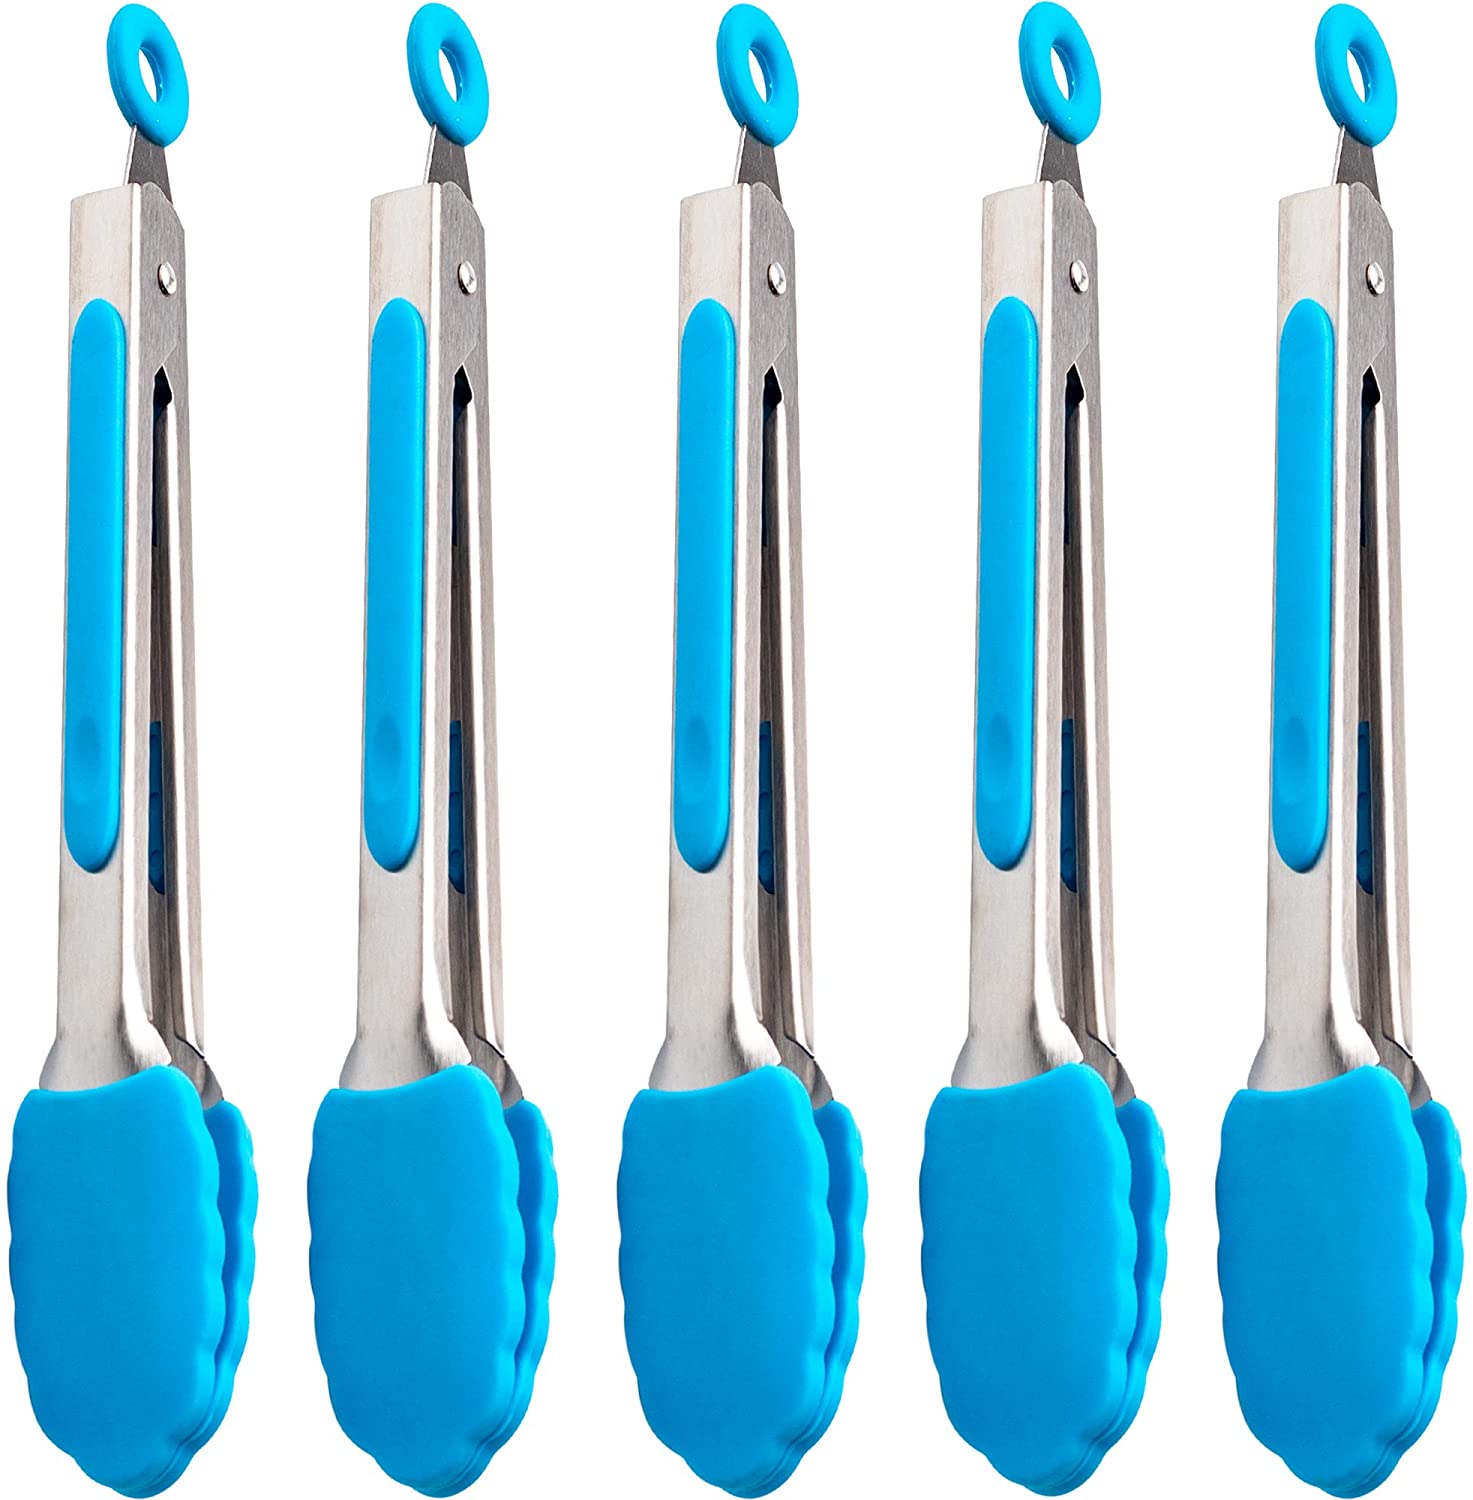 5 Pack Silicone Kitchen Cooking Tongs Set 7-Inch Mini Heavy Duty